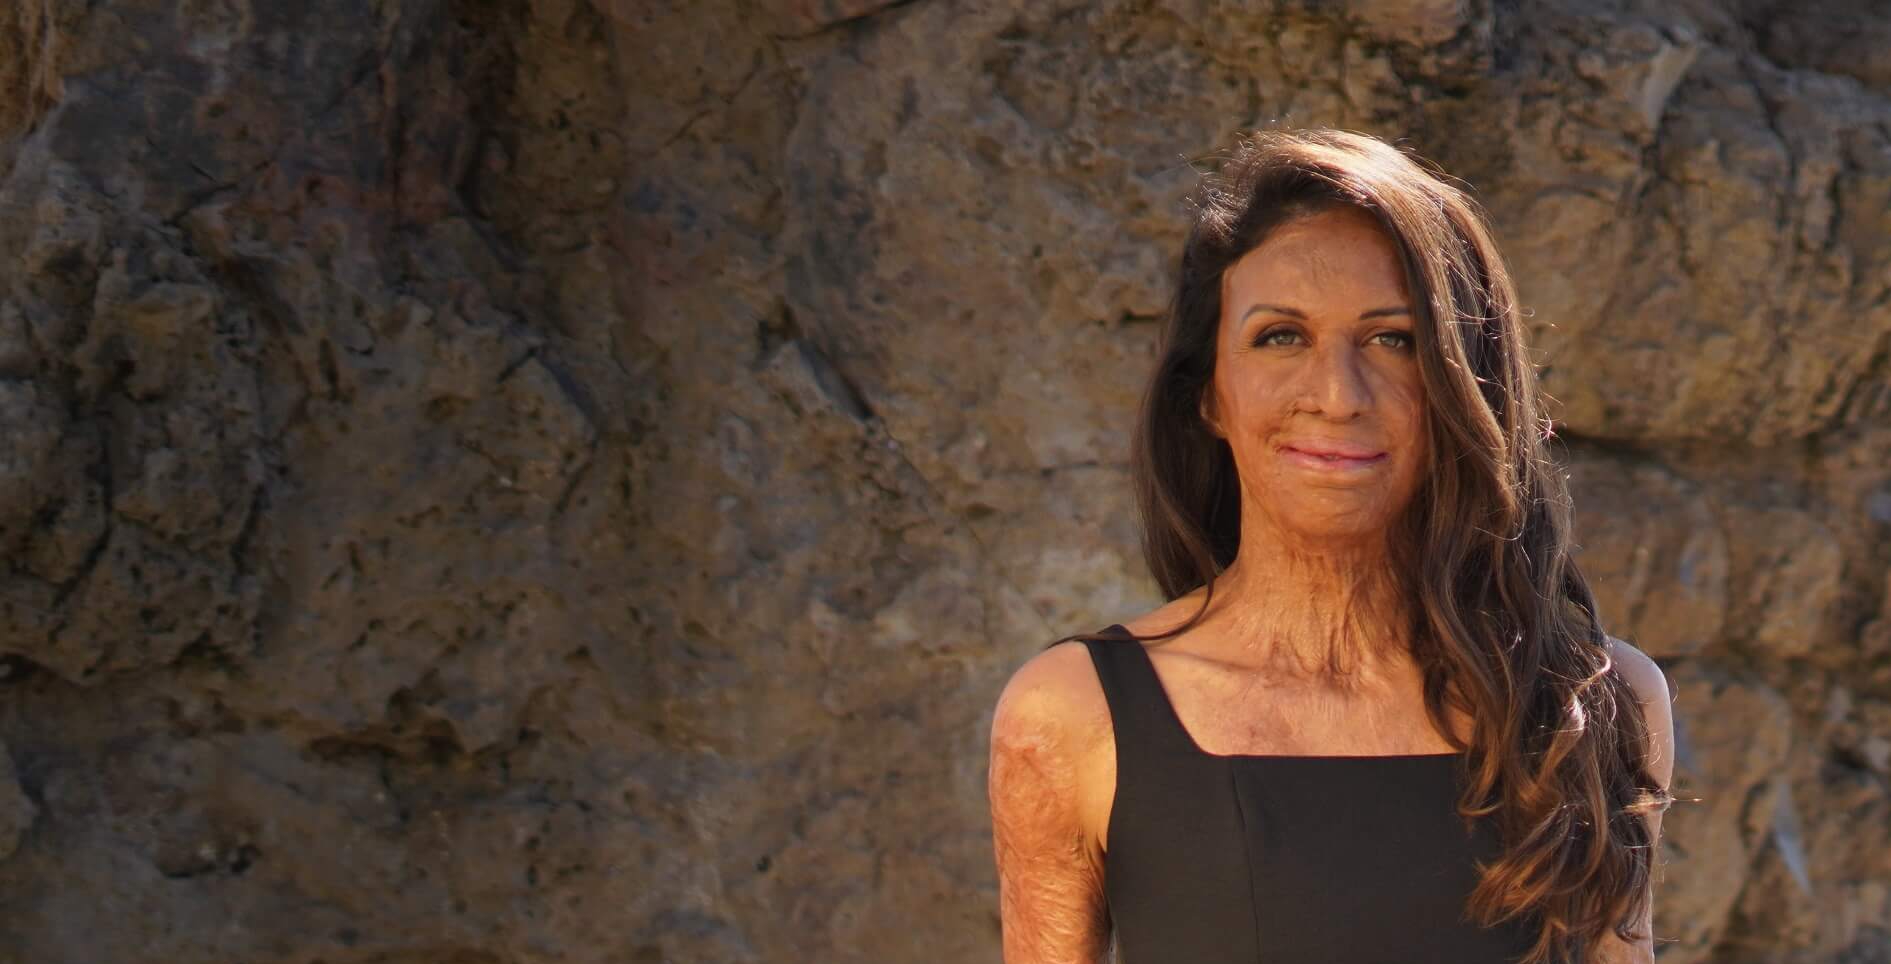 Adversity & Activating Your Full Potential With Turia Pitt